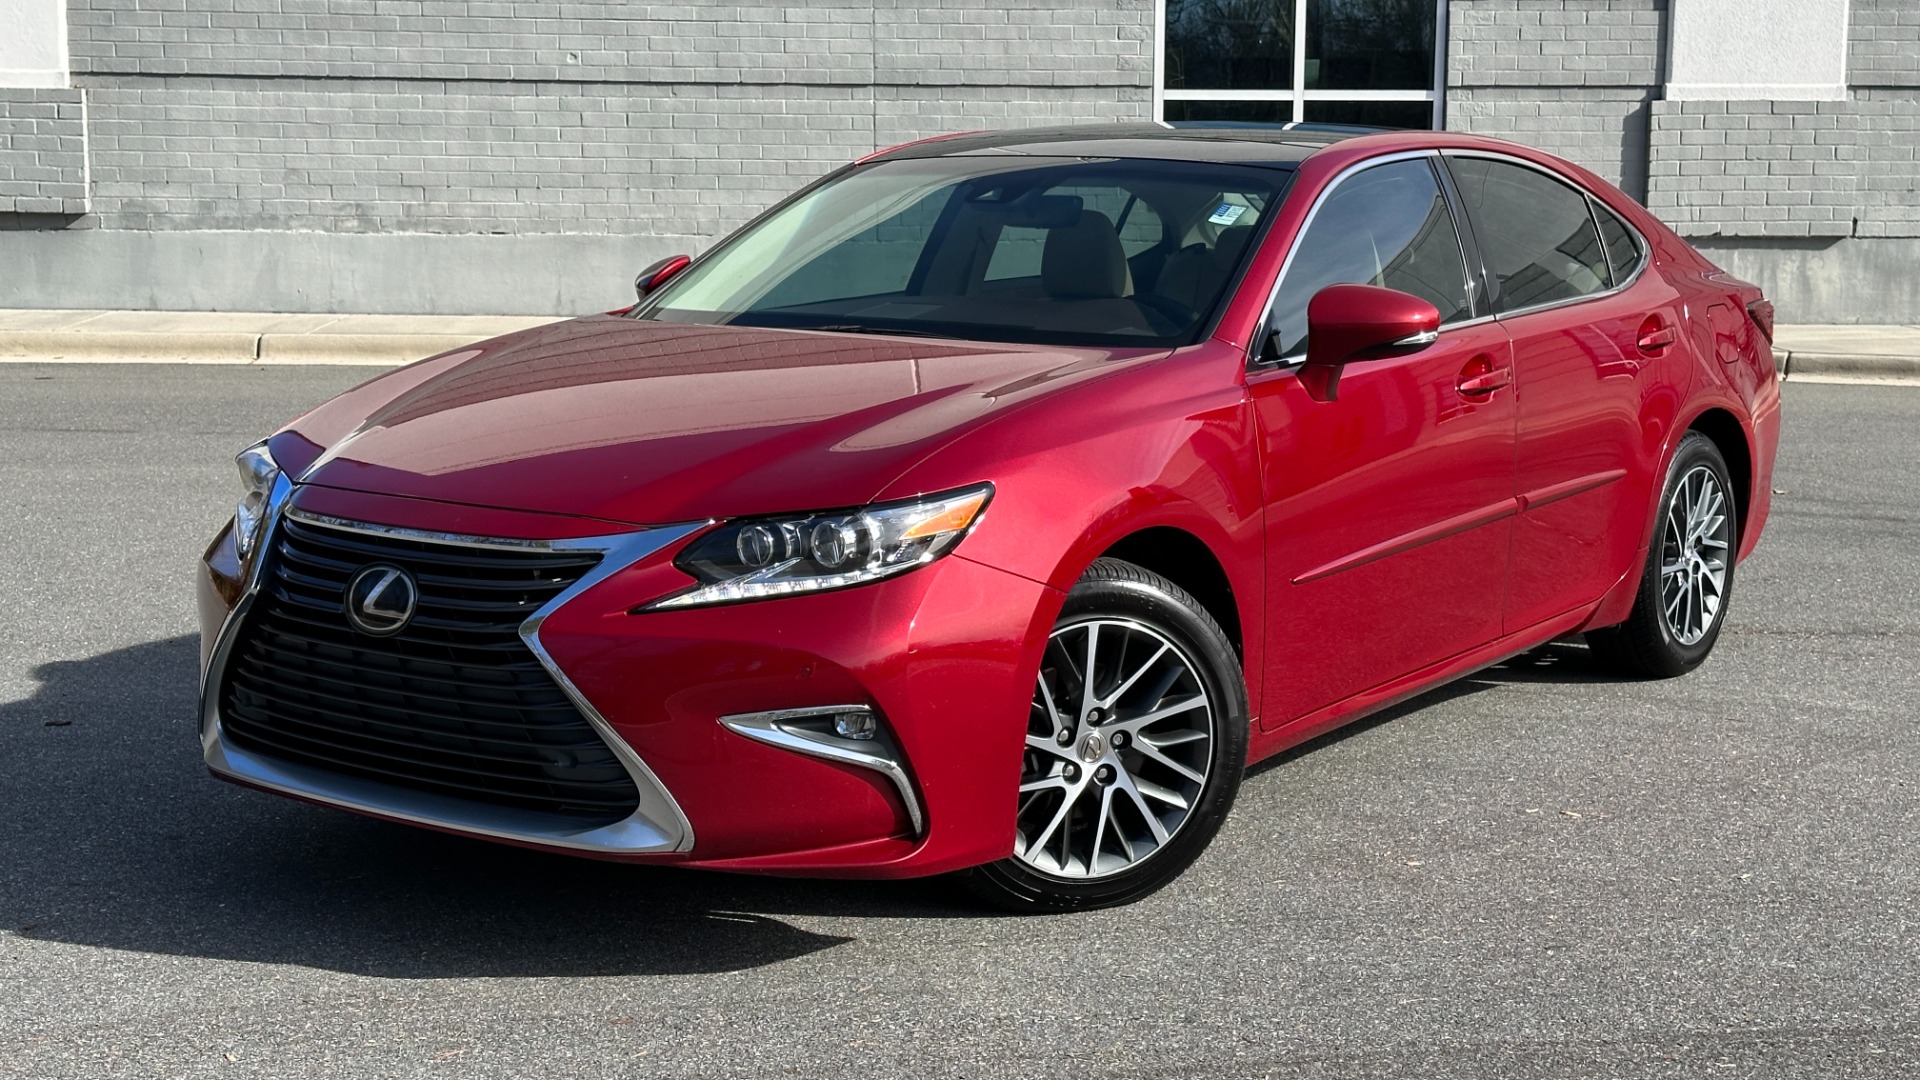 Used 2018 Lexus ES ES 350 / LUXURY PKG / PANORAMIC ROOF / NAV PACKAGE / LED LIGHTS for sale $24,595 at Formula Imports in Charlotte NC 28227 1